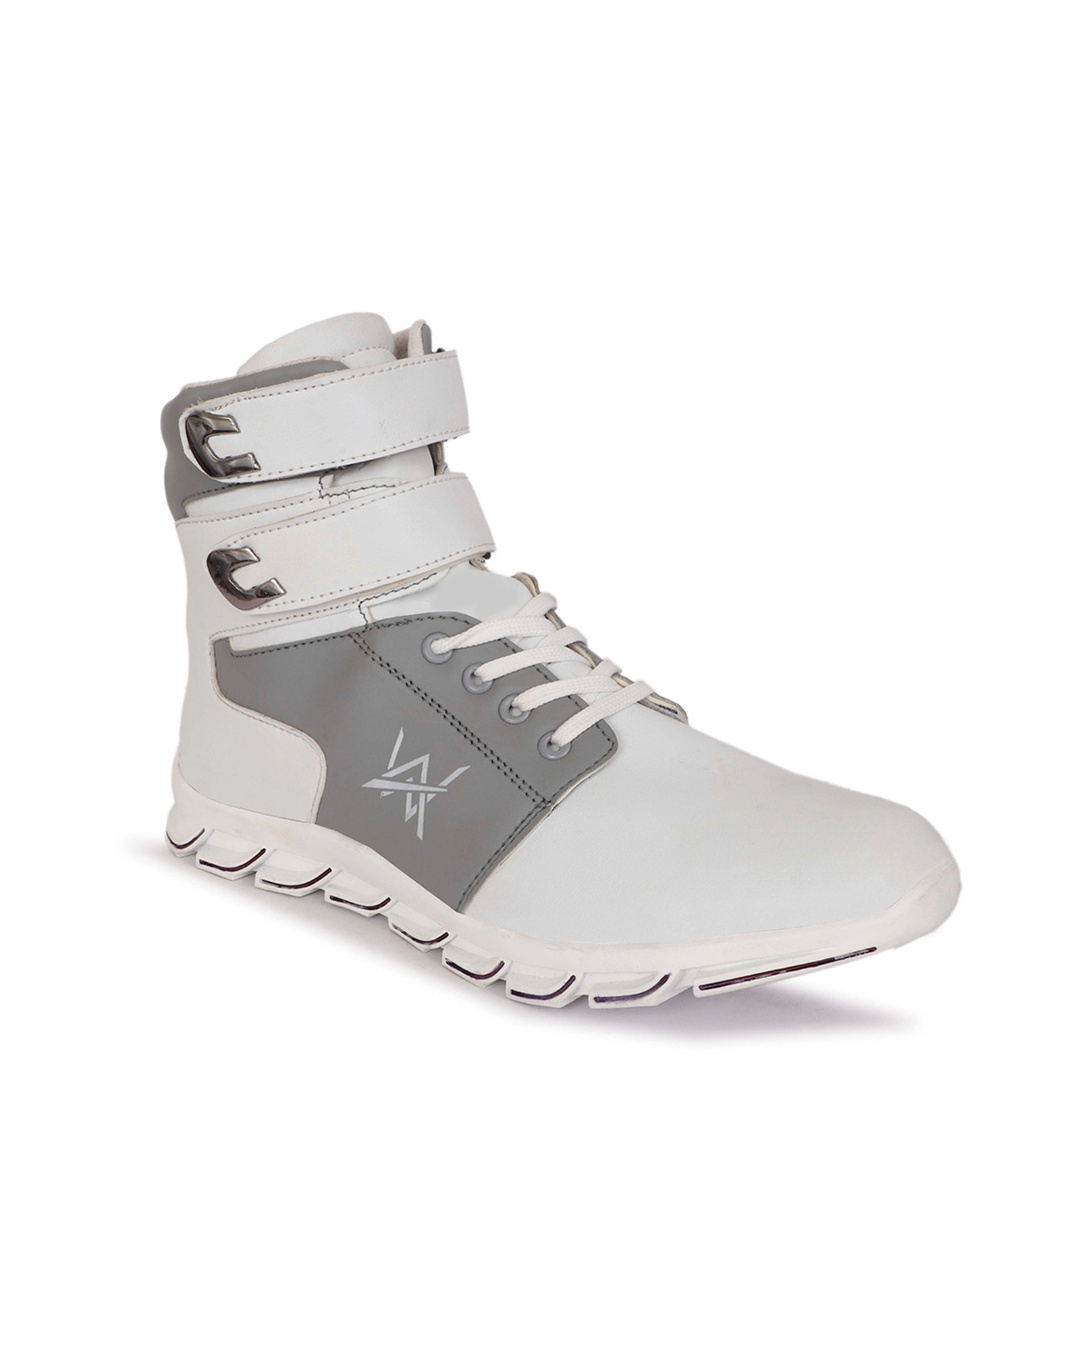 Shop Men's Grey and White Casual Boot-Back